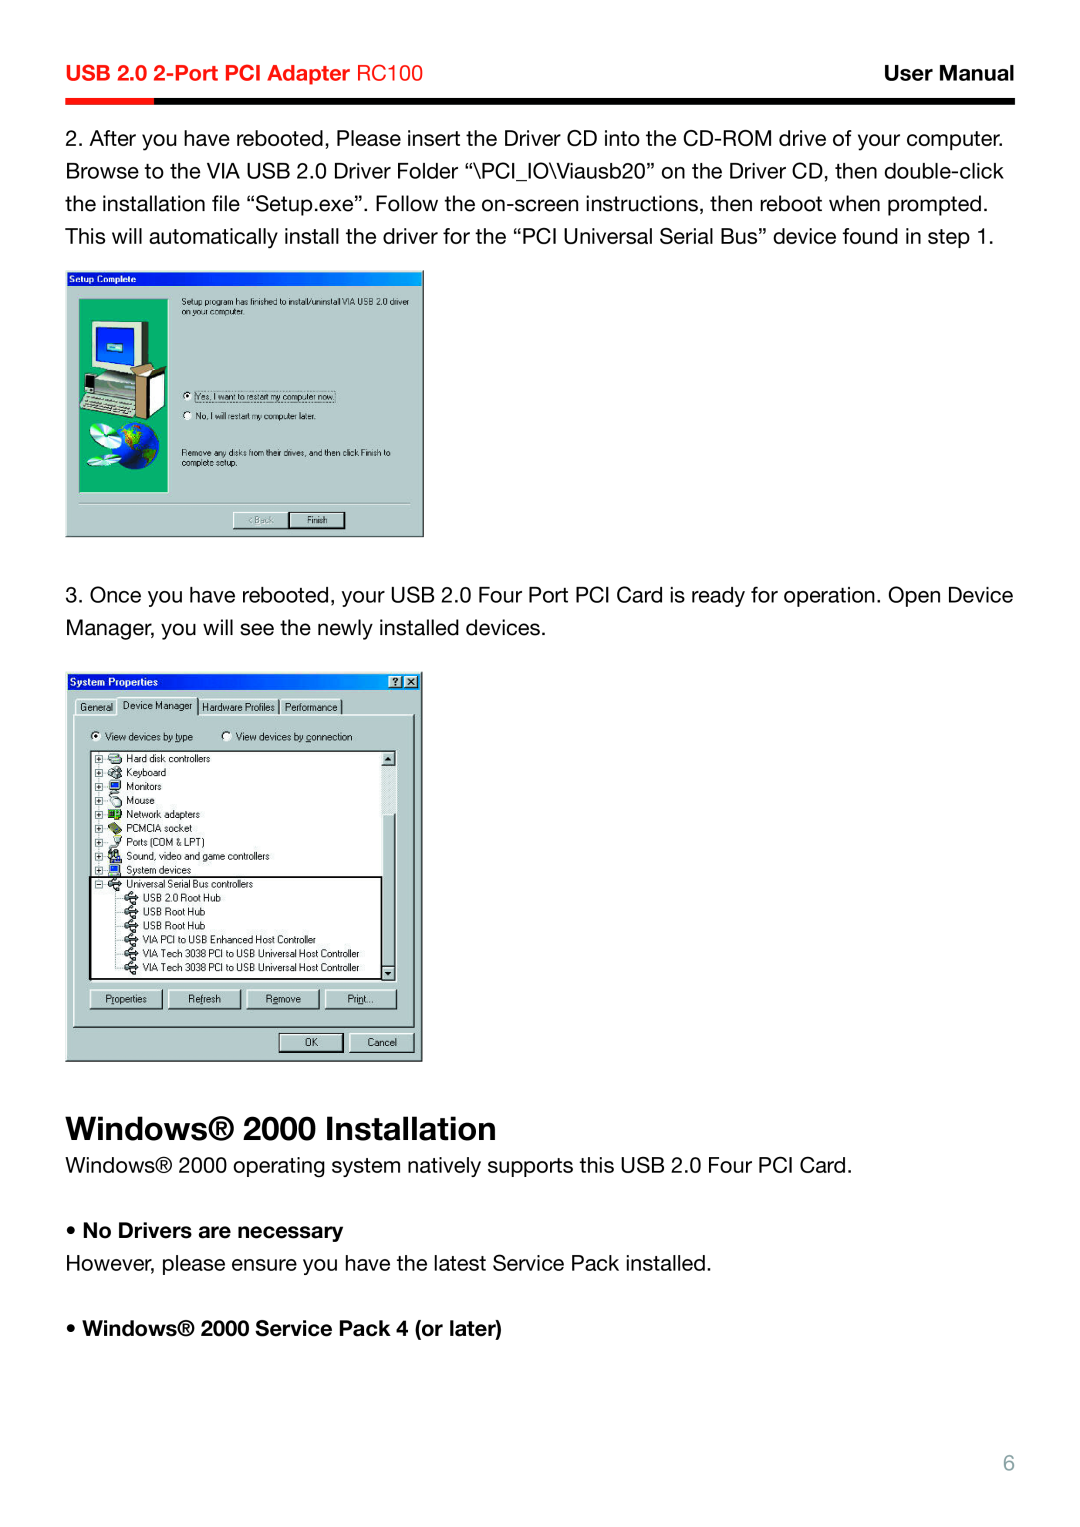 Rosewill RC-100 Windows 2000 Installation, No Drivers are necessary, Windows 2000 Service Pack 4 or later, User Manual 